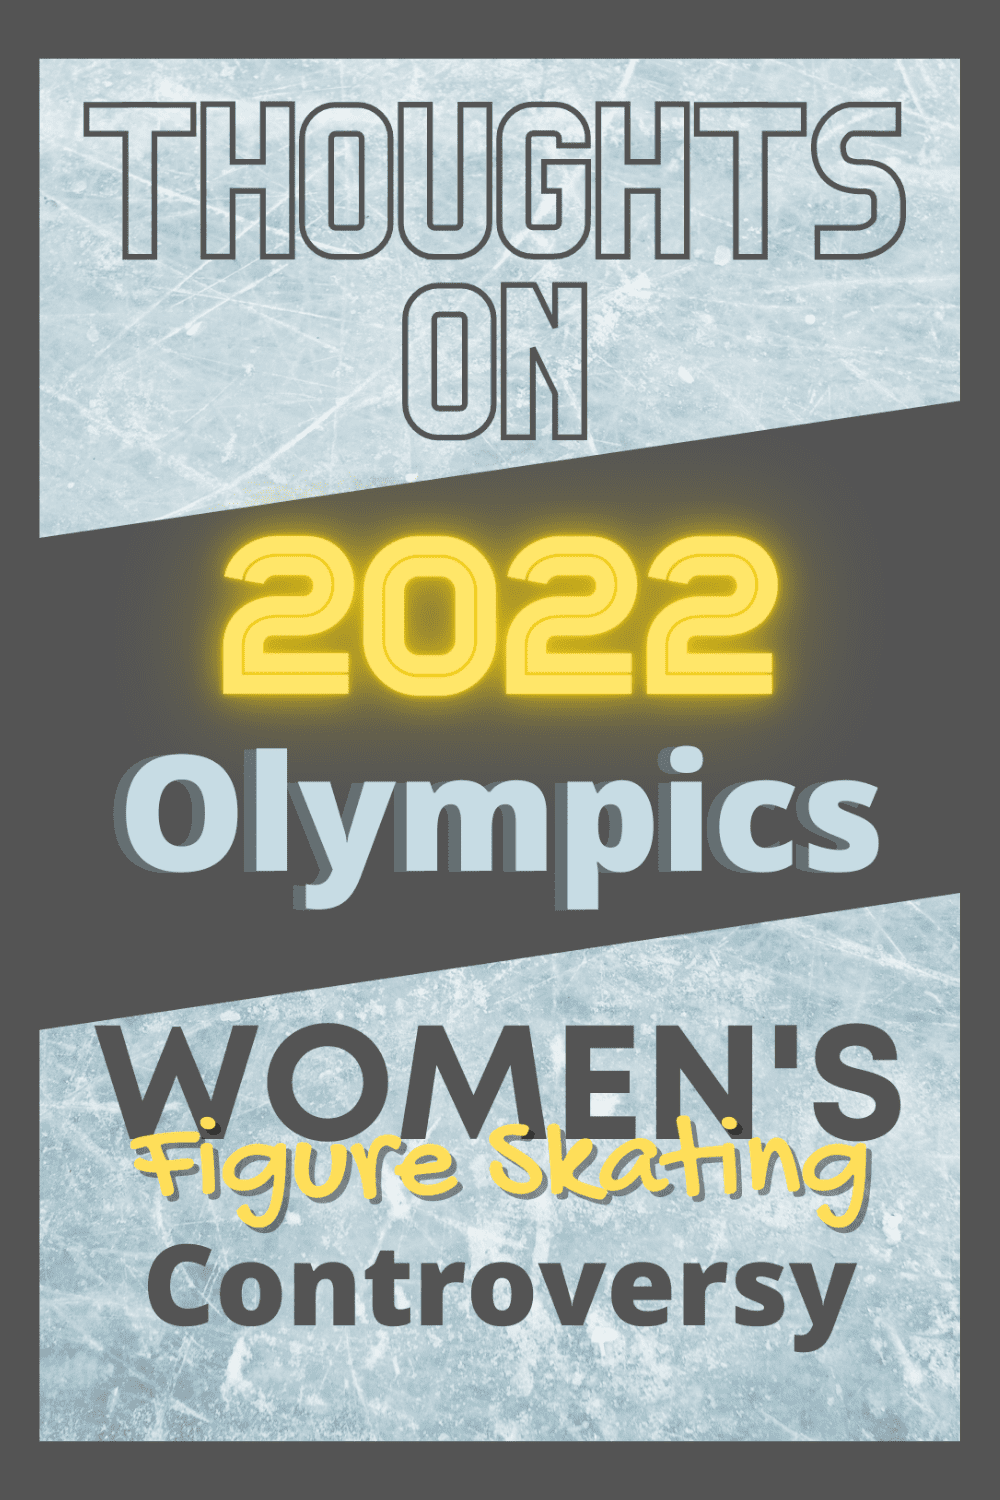 2022 Olympic controversy